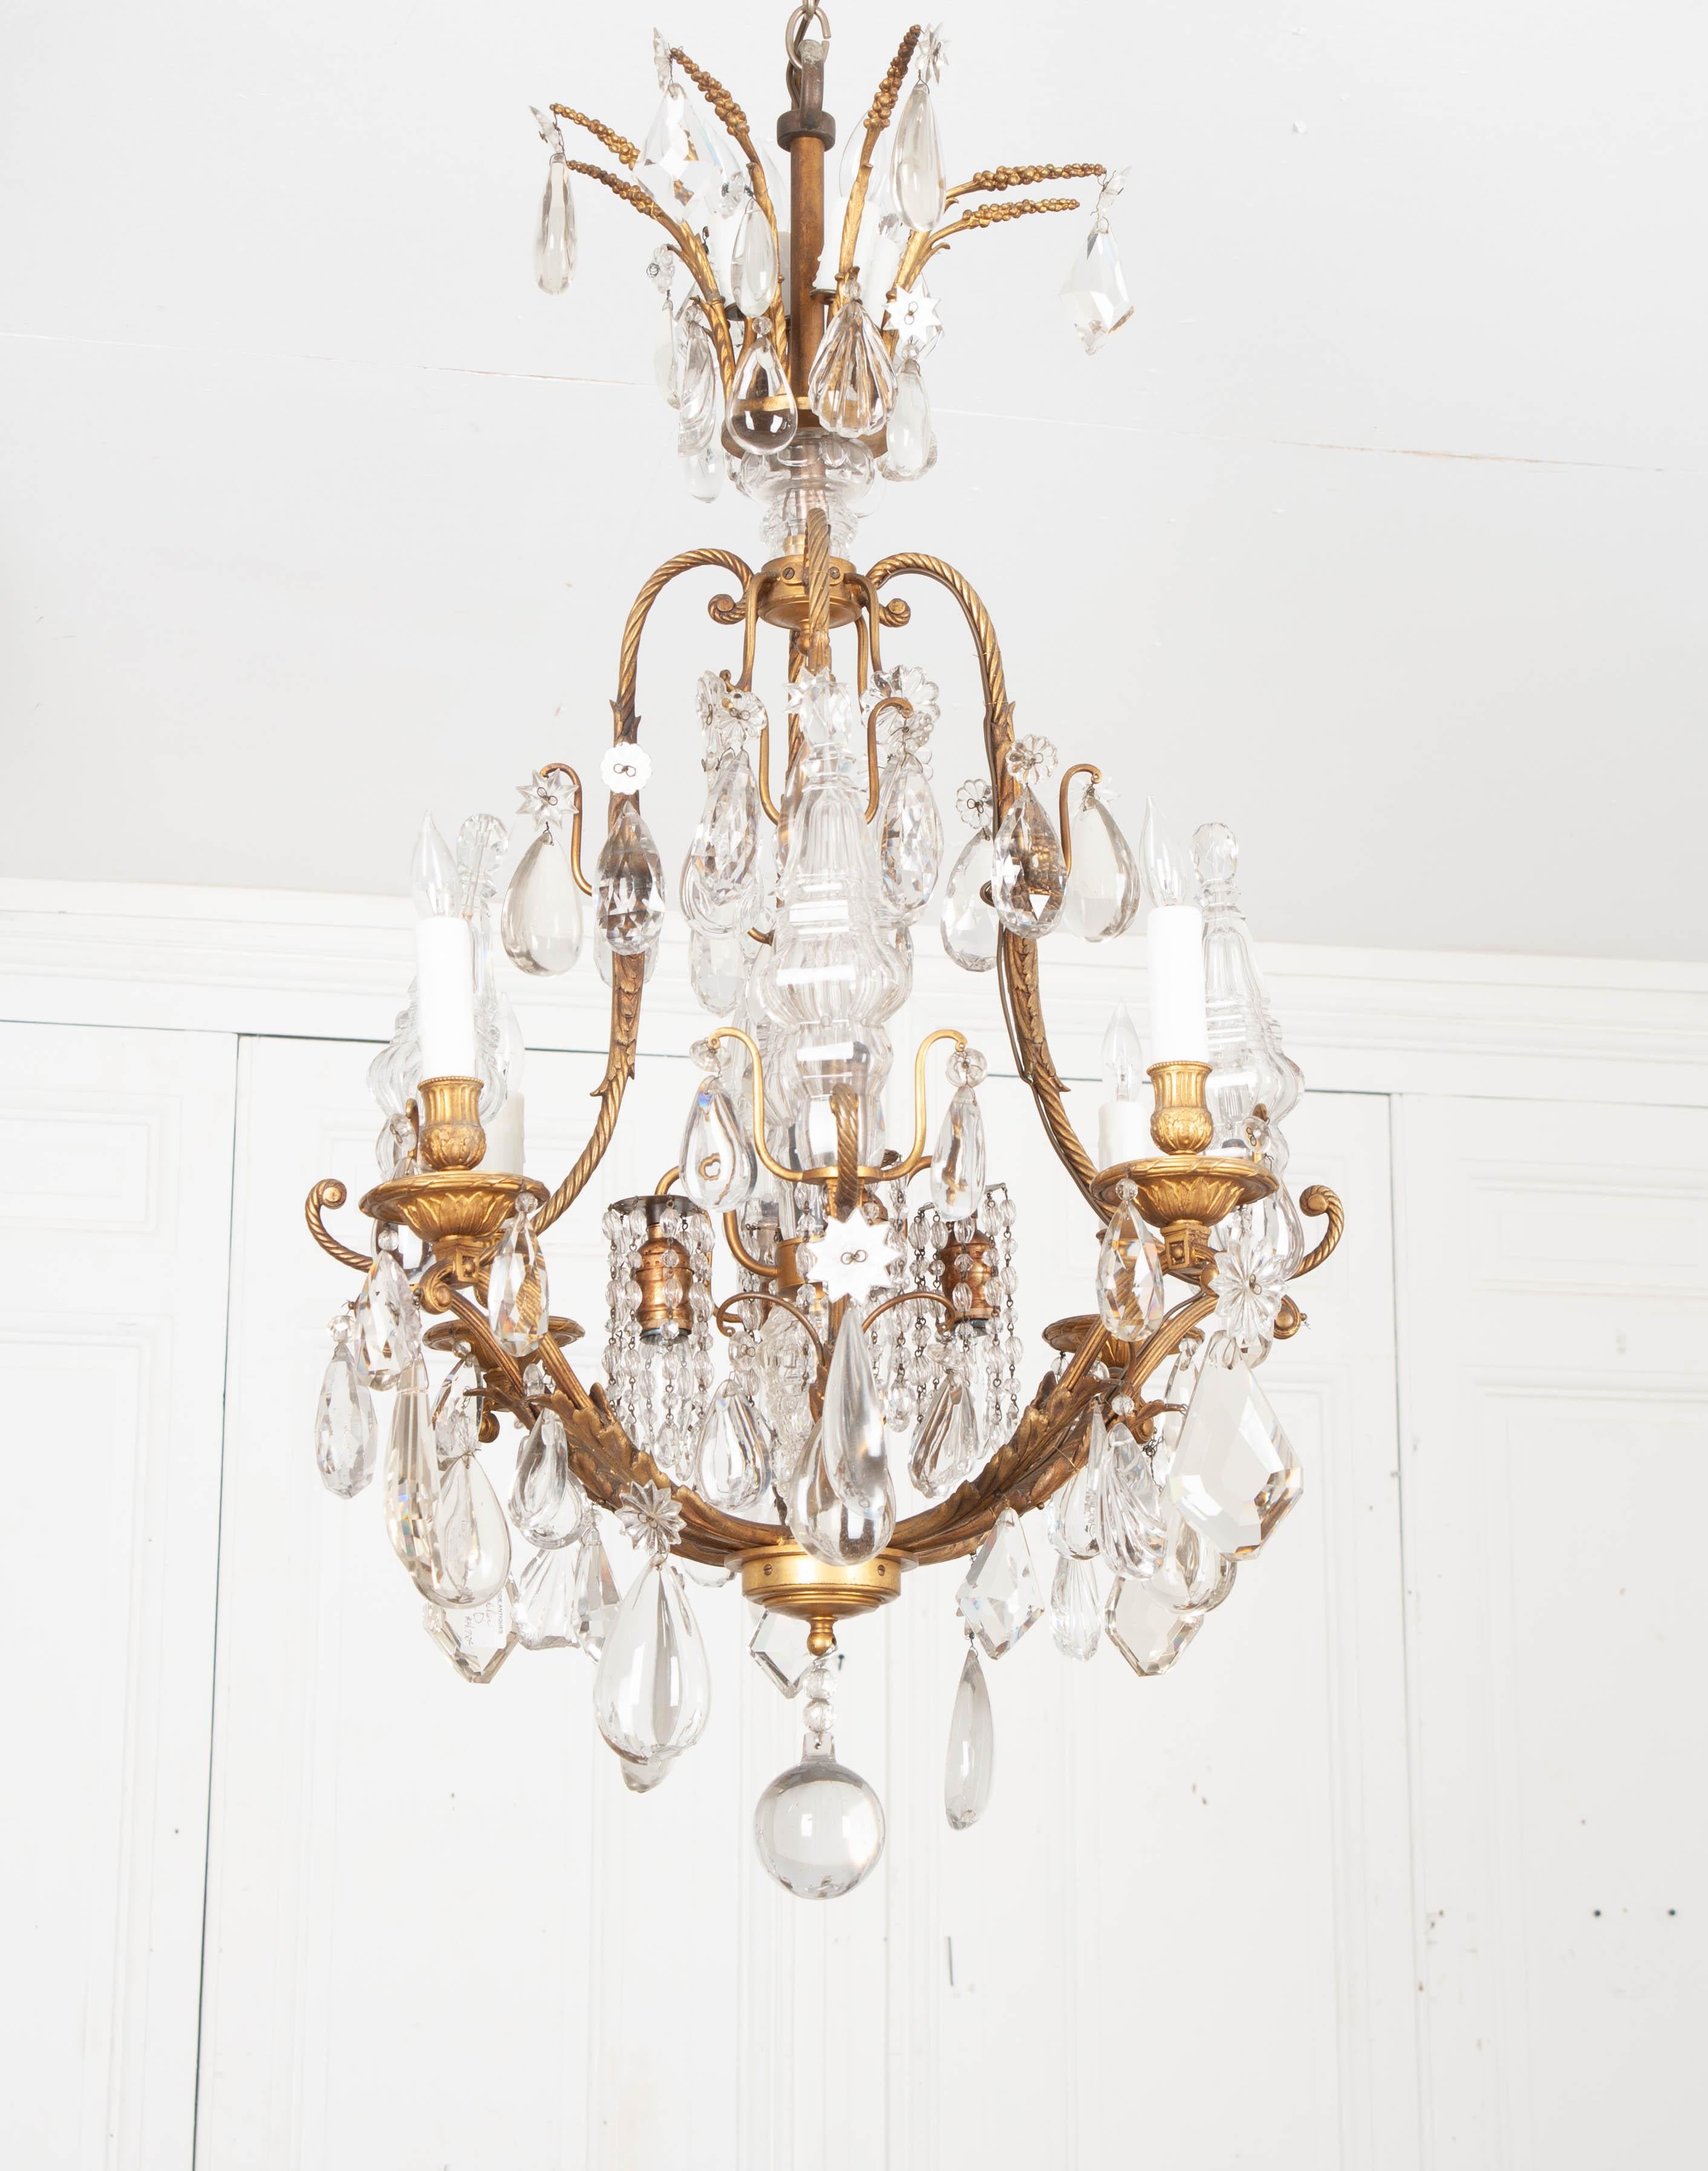 An outstanding French 19th century brass and crystal twelve light birdcage-form antique chandelier. Eight twisted rope scrolled arms extend to brass bobeche drip pans with four candle light sconces and four decorative glass baluster finials. Their